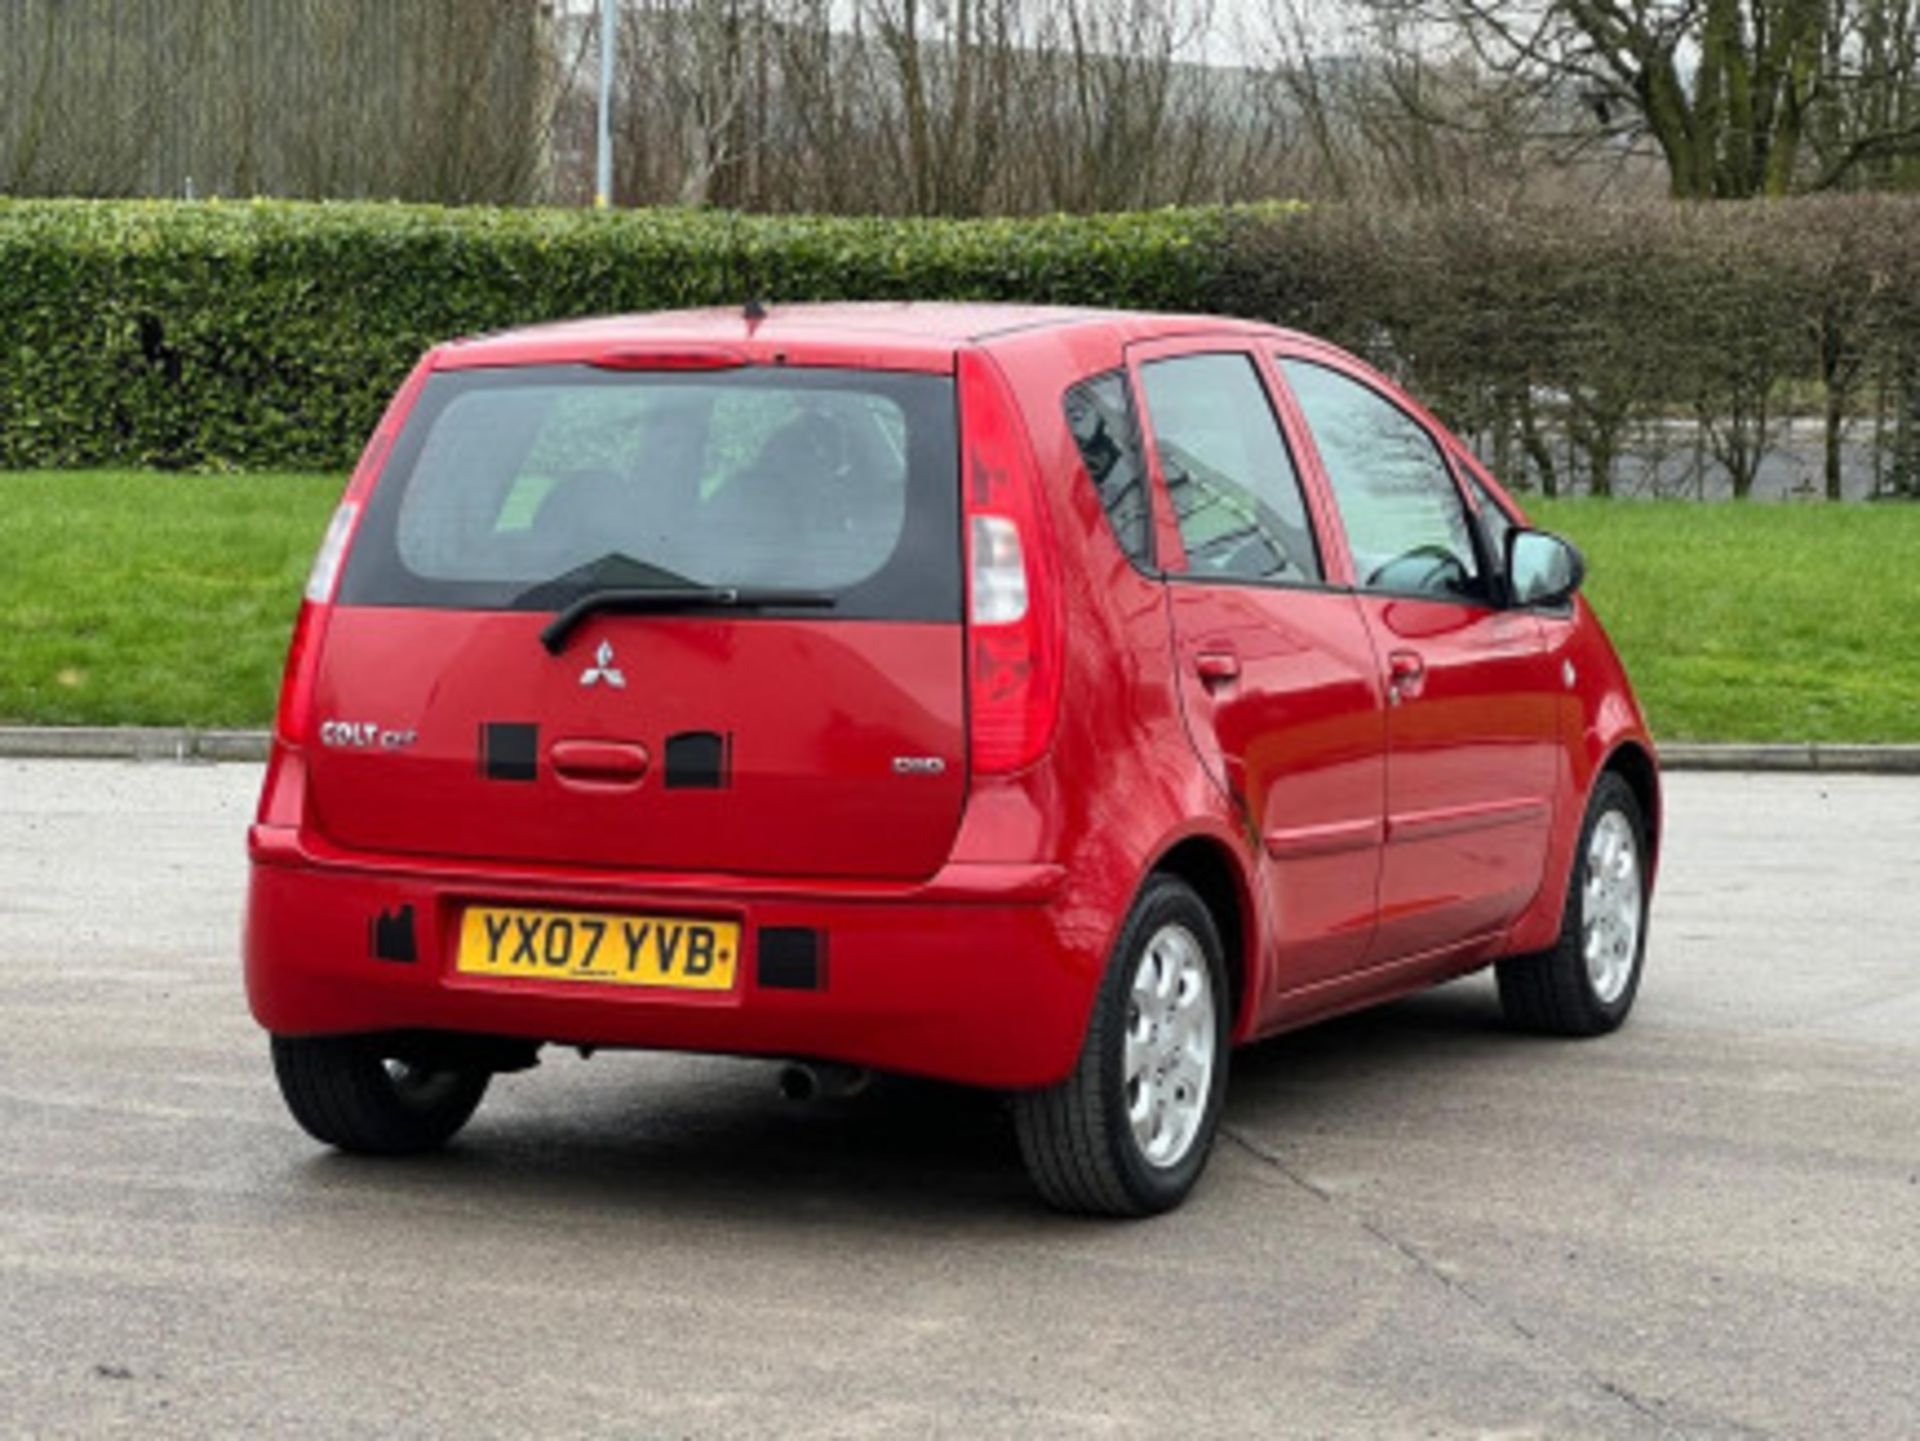 2007 MITSUBISHI COLT 1.5 DI-D DIESEL AUTOMATIC >>--NO VAT ON HAMMER--<< - Image 25 of 127